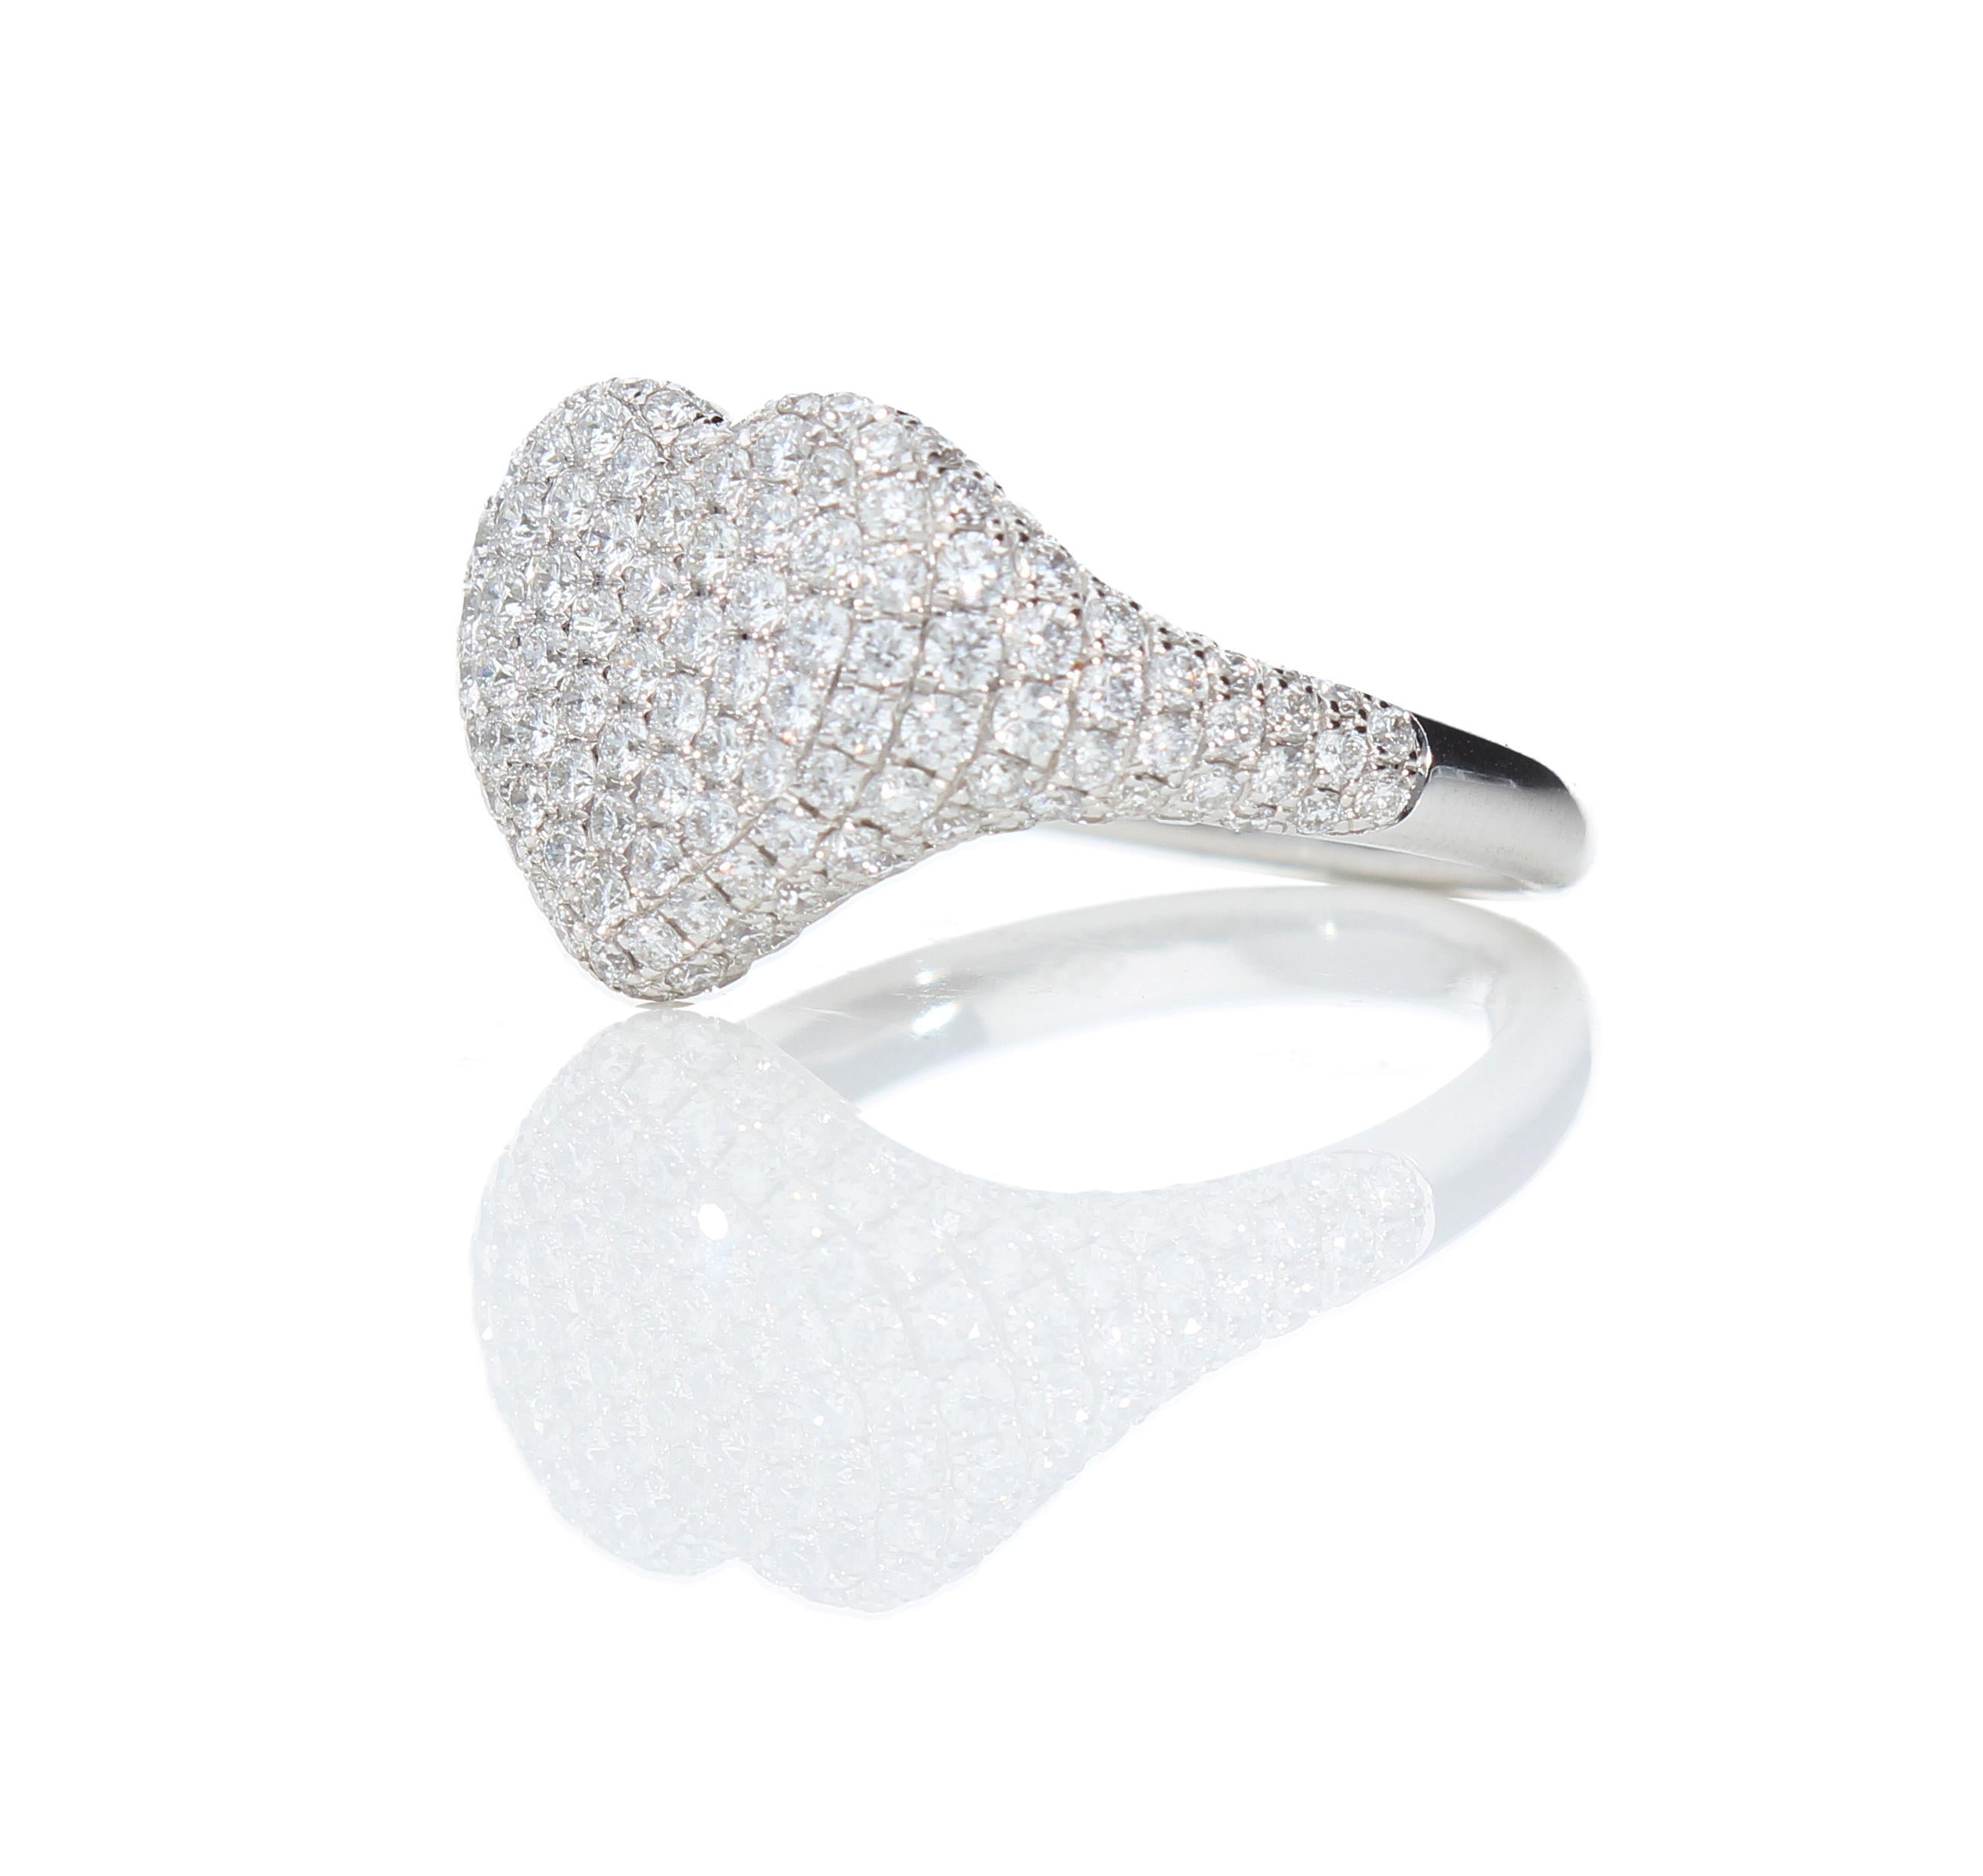 Brilliant Cut Diamonds ct 1.73, Contemporary Heart Ring in 18 Kt Gold. Made in Italy For Sale